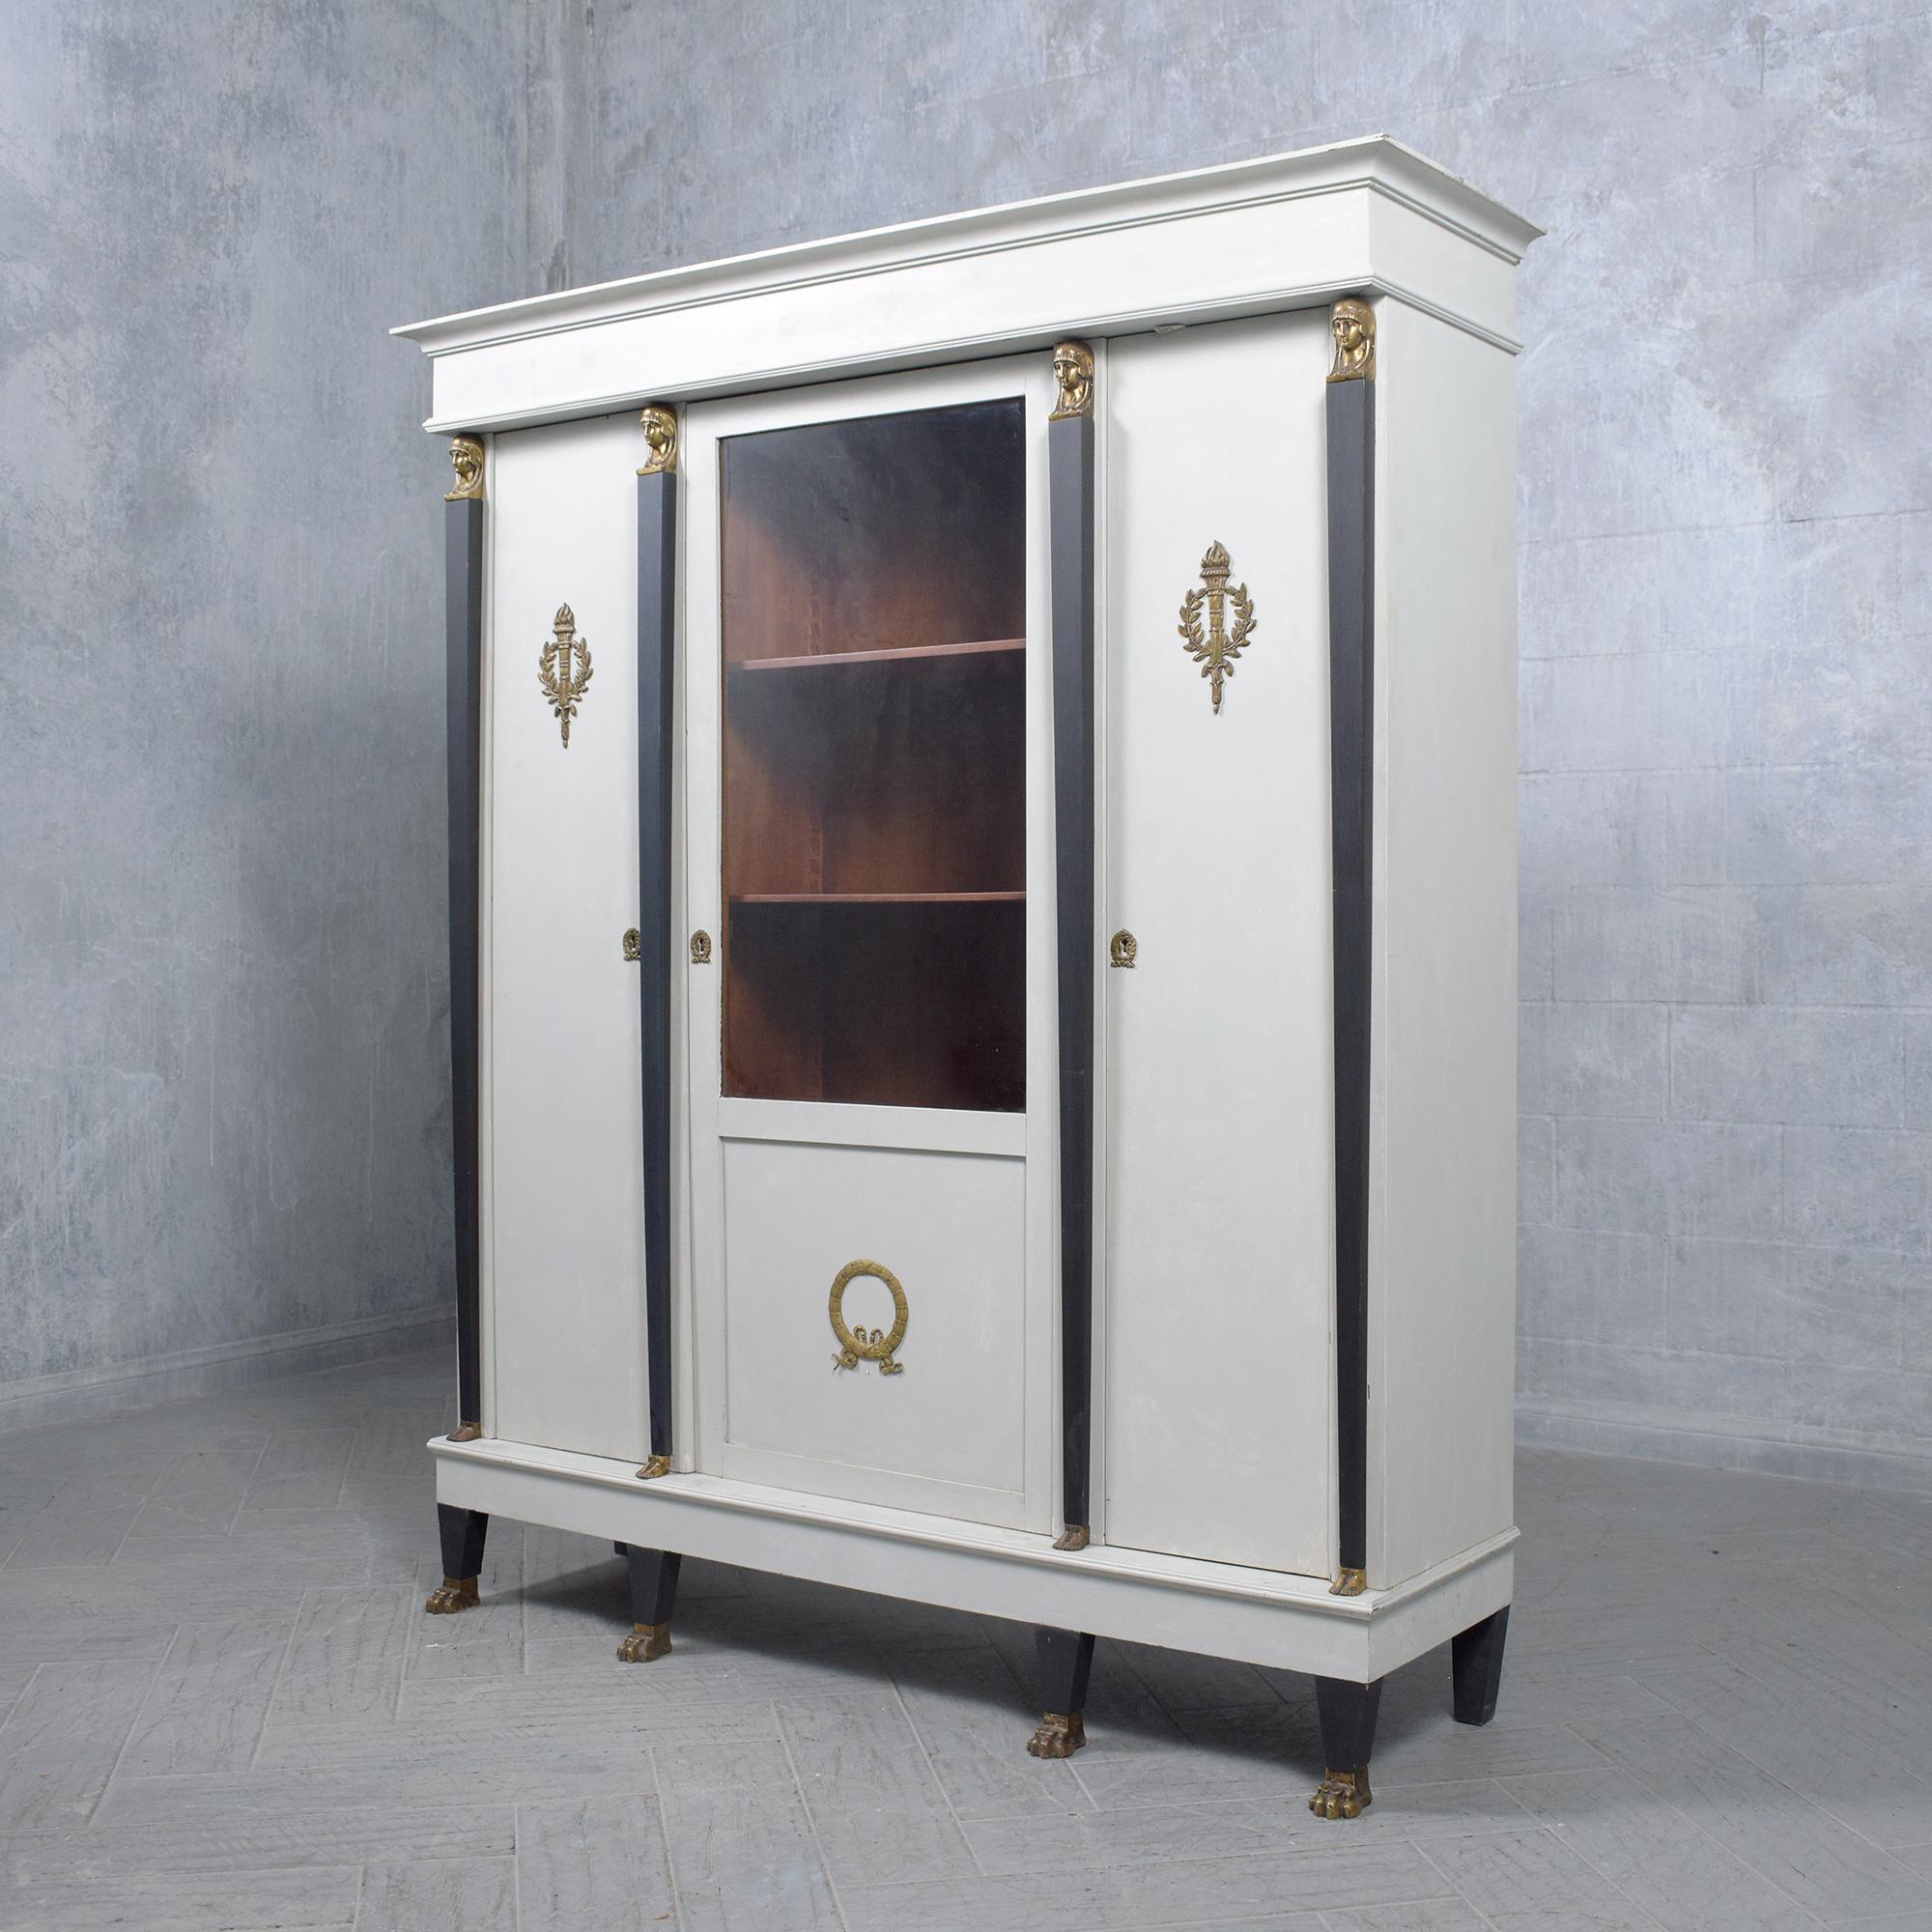 French Empire Bookcase: A Symphony of Mahogany, Brass, and Glass Elegance 4